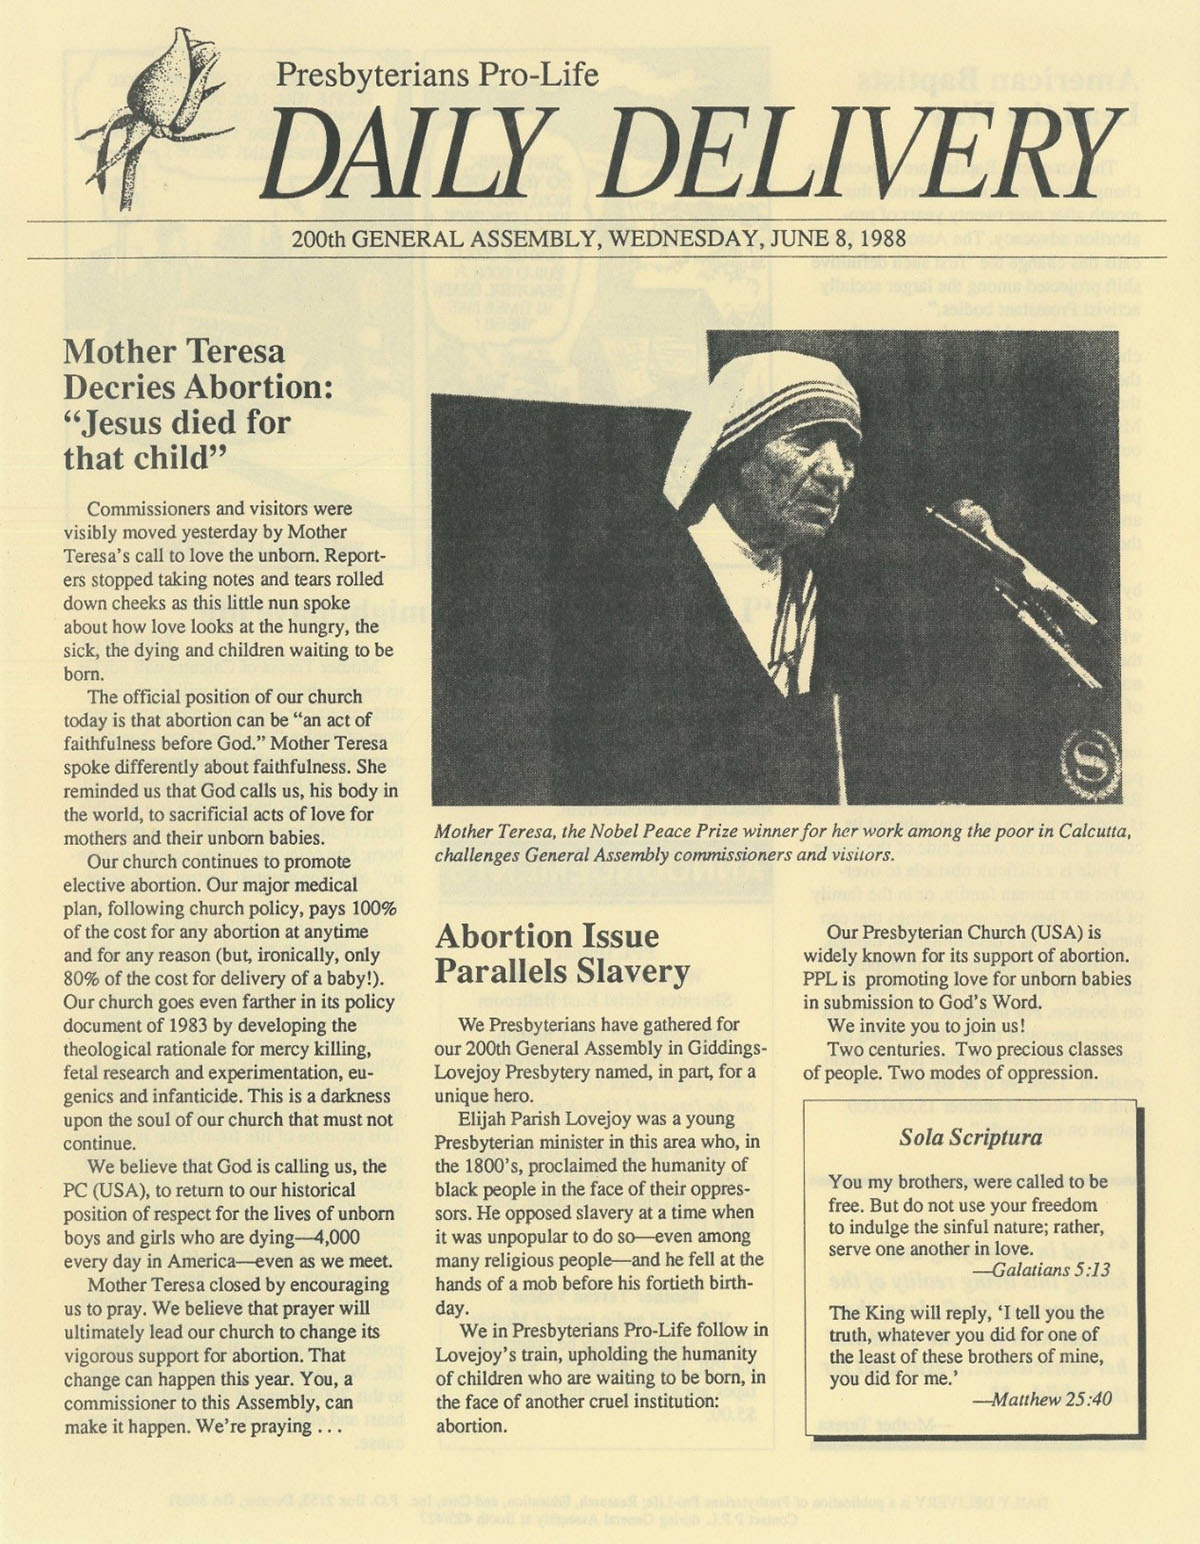 Daily Delivery, Presbyterians Pro-Life newsletter, June 8, 1988. PHS accession 92-0206b.